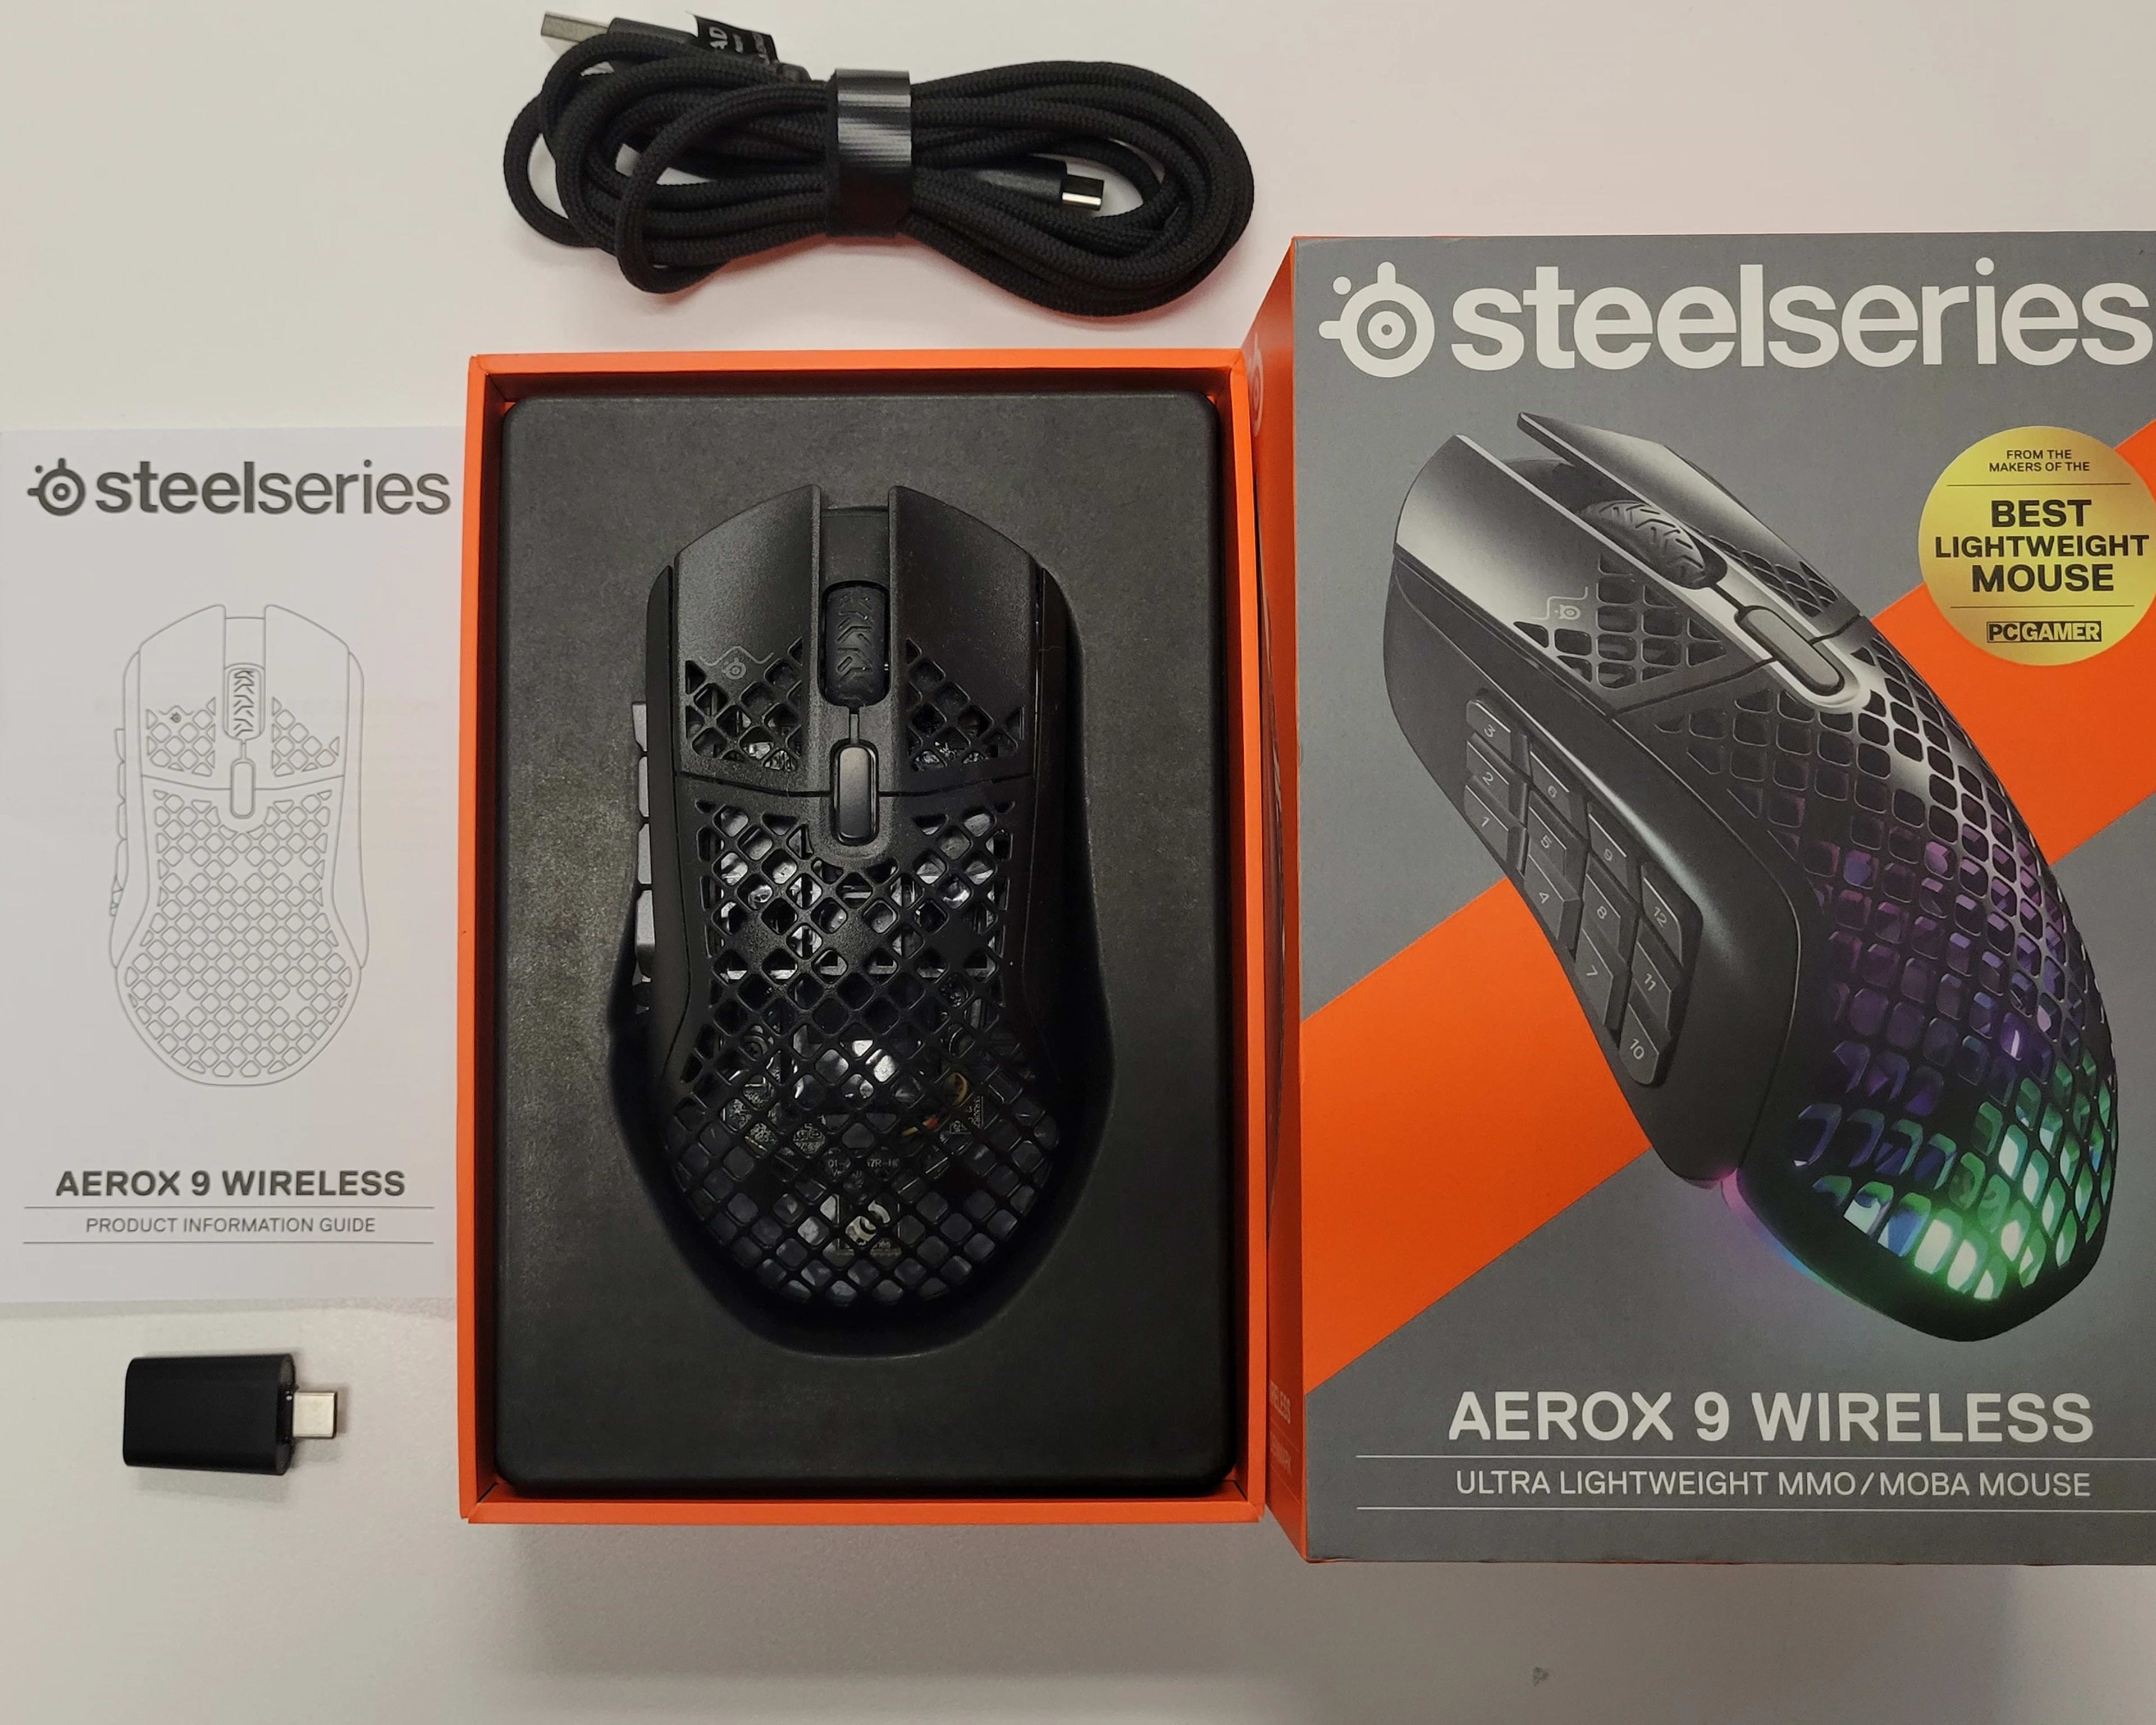 Steelseries Aerox 9 Wireless gaming mouse, barely used, like new